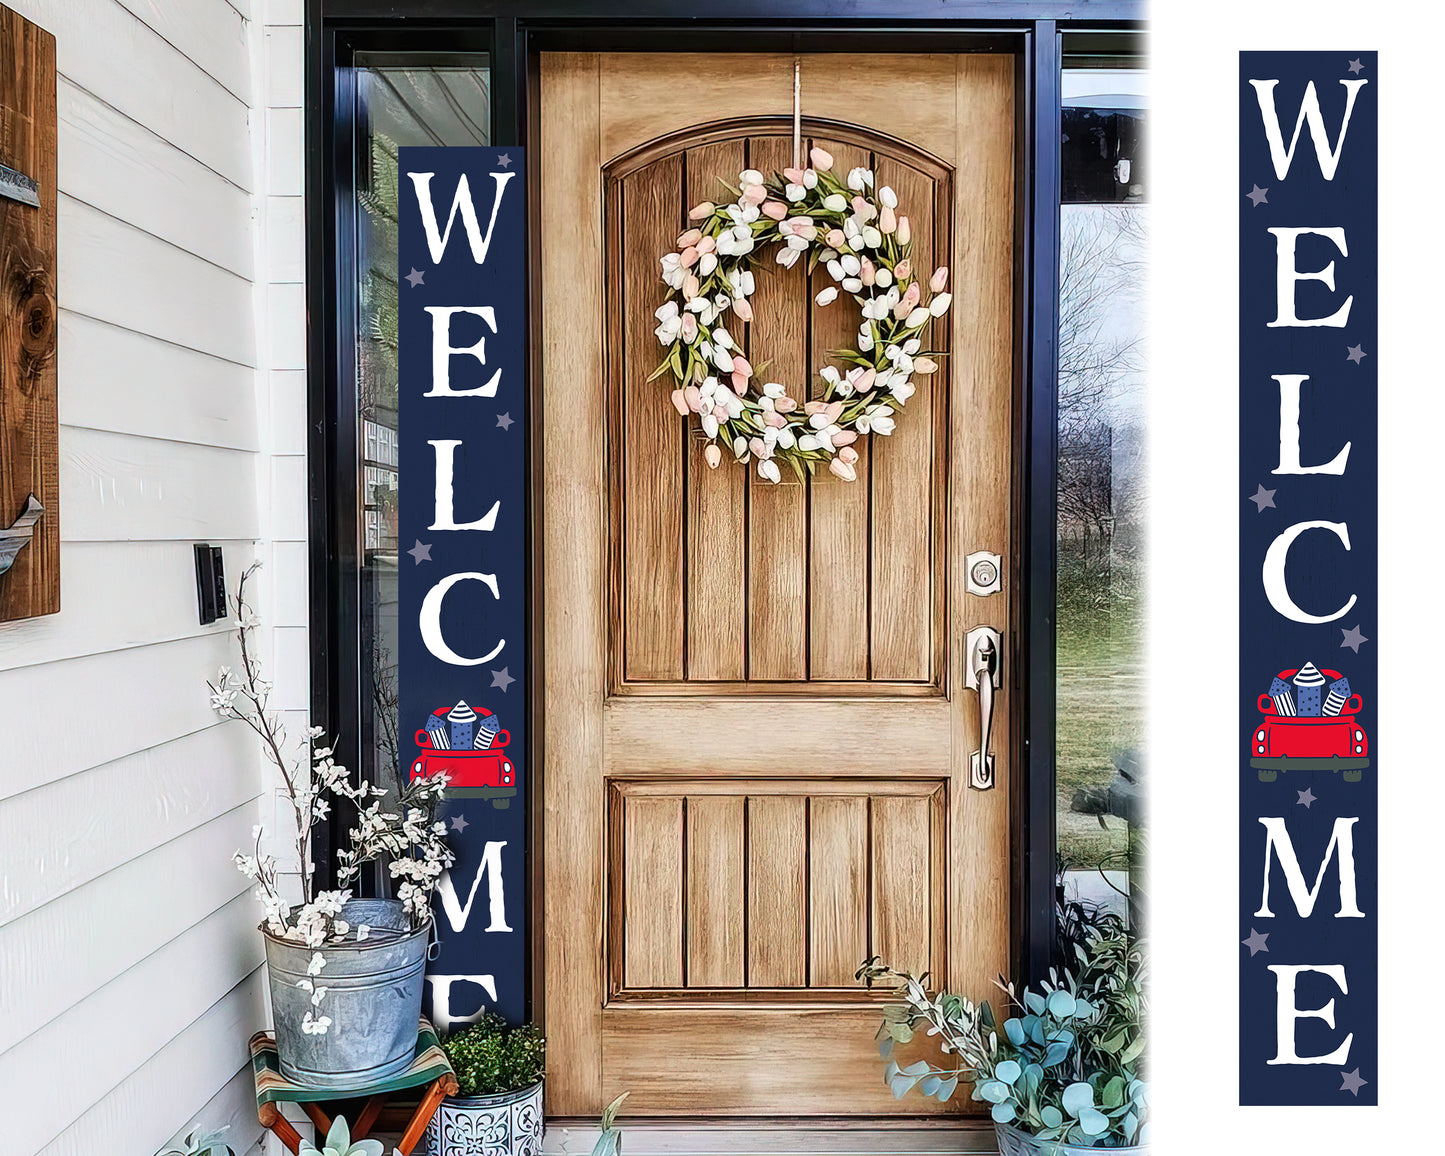 72-inch 4th of July Welcome Porch Sign | Patriotic Porch Decor | Farmhouse Decor for Porch | Independence Day Outdoor Decor